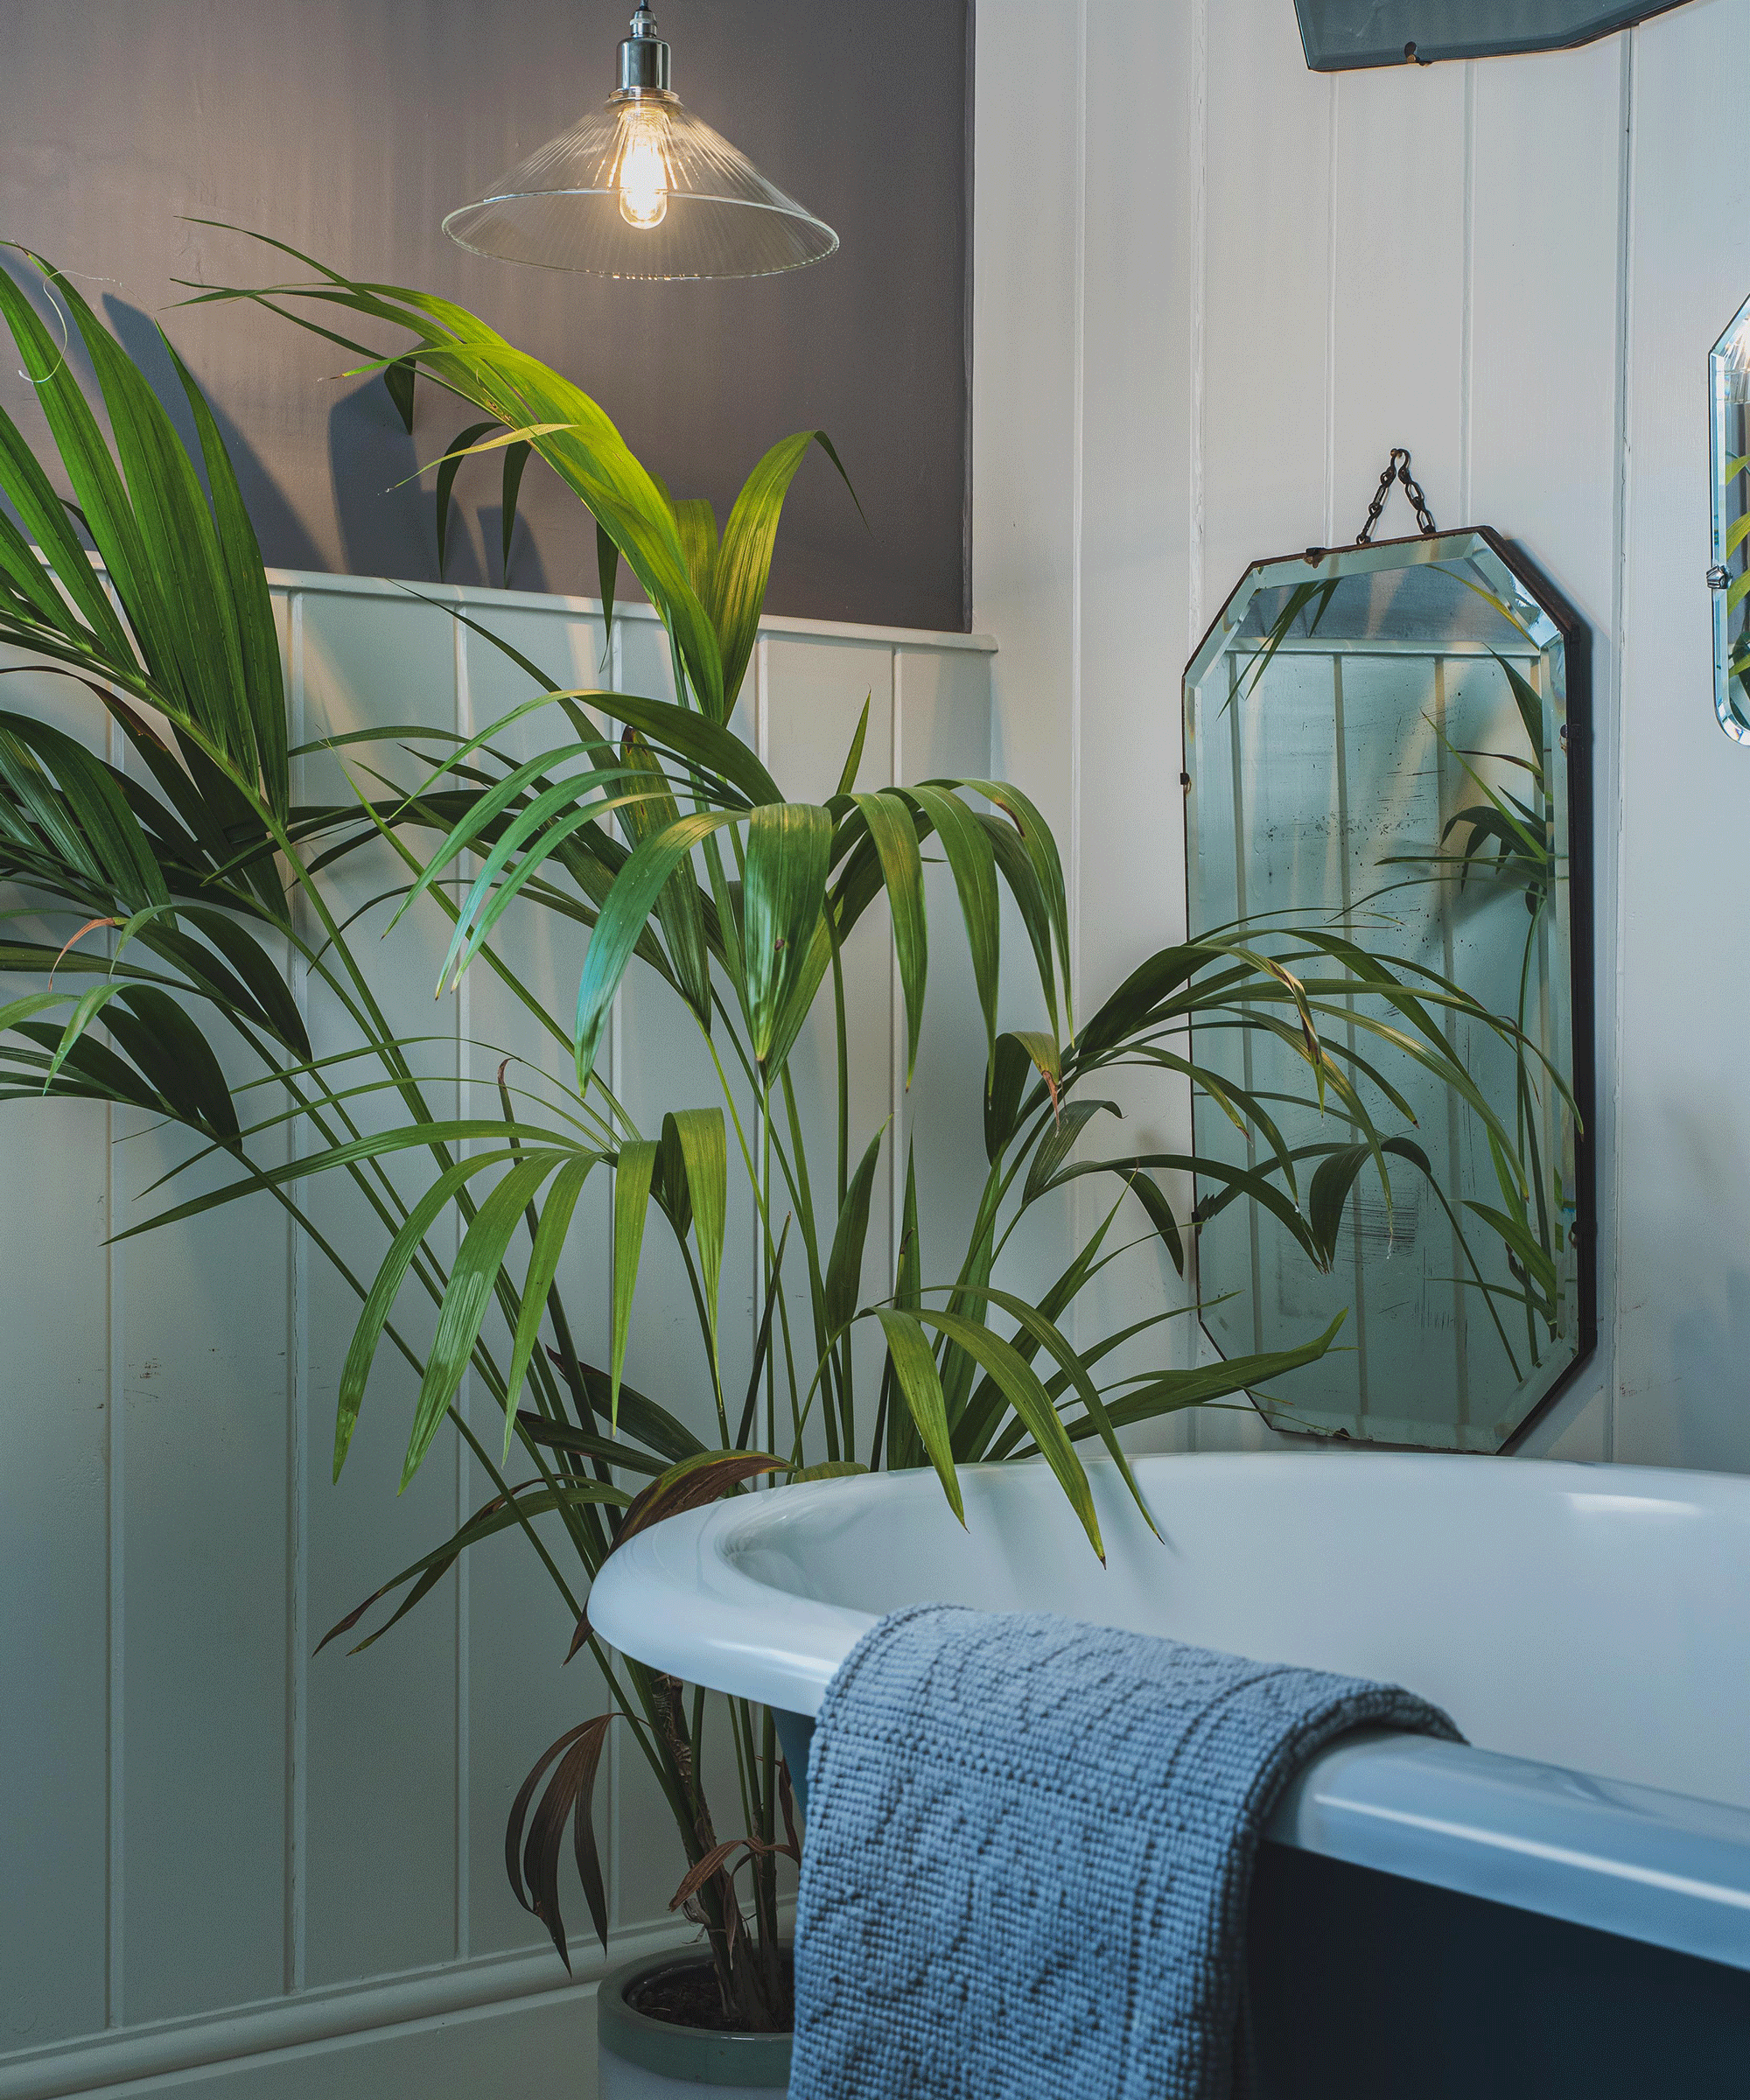 Skinny ribbed glass luxury bathroom pendant light hung over pastel blue bath with mirror on wall and palm tree plants